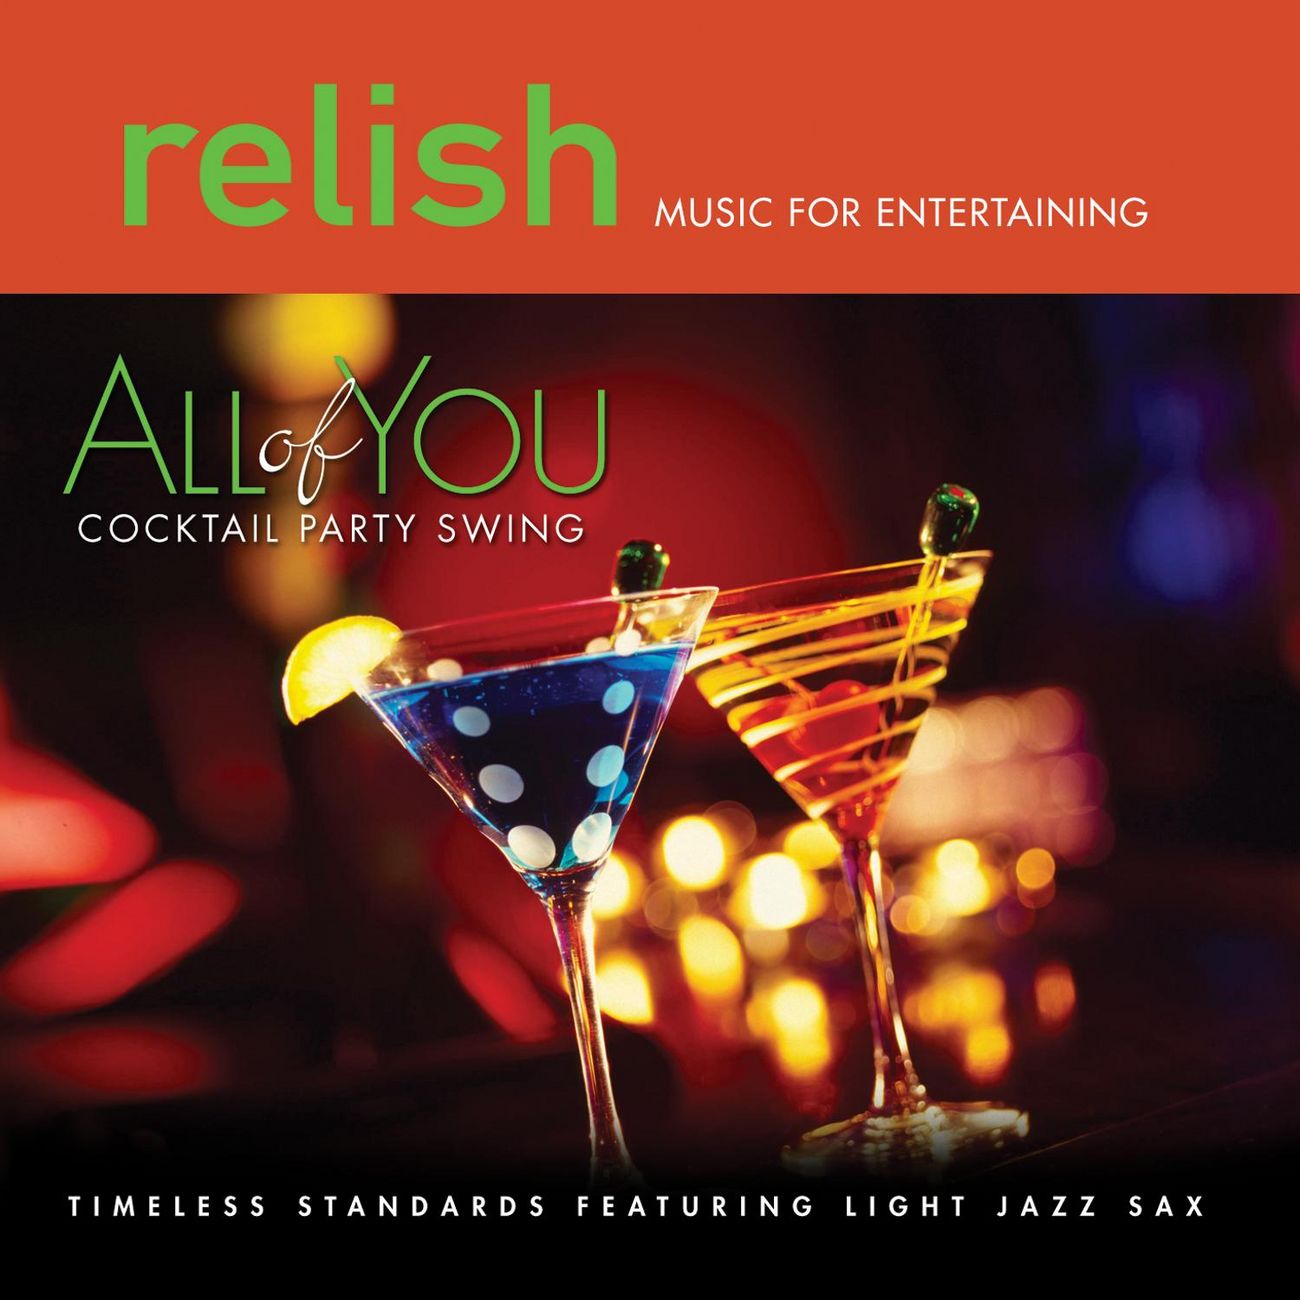 All of You: Timeless Standards Featuring Light Jazz Sax